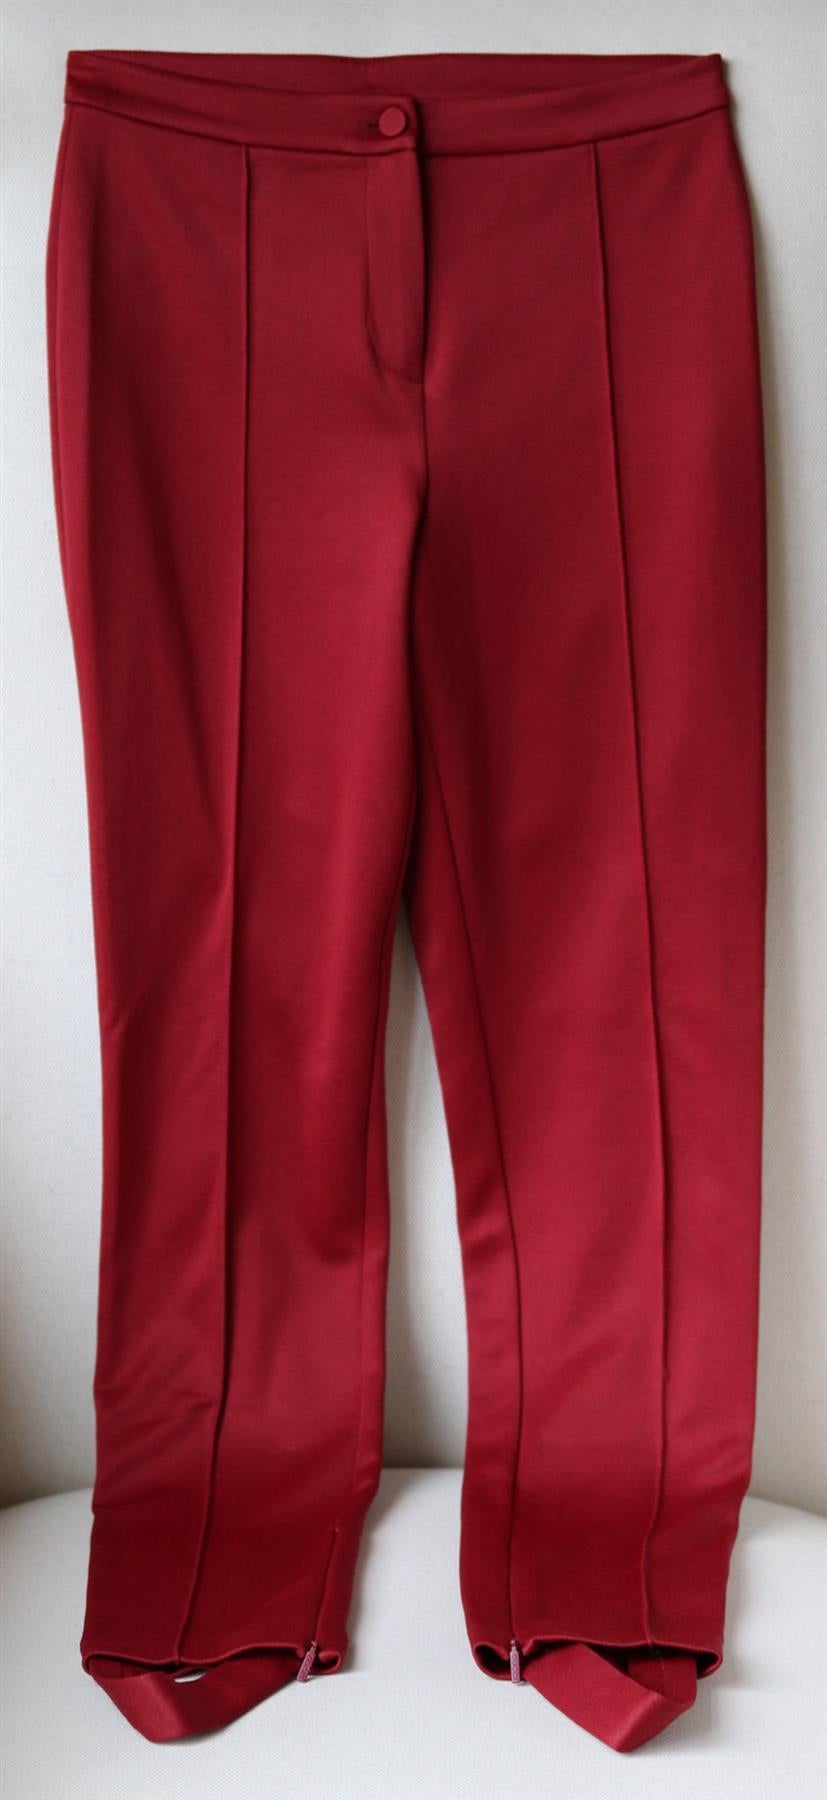 These Gucci leggings are the perfect alternative to the brand's track pants for a more fitted silhouette.
They are made in Italy from sculpting tech-jersey, they have a high-waist and stirrups.
Burgundy tech-jersey.
Button and concealed zip